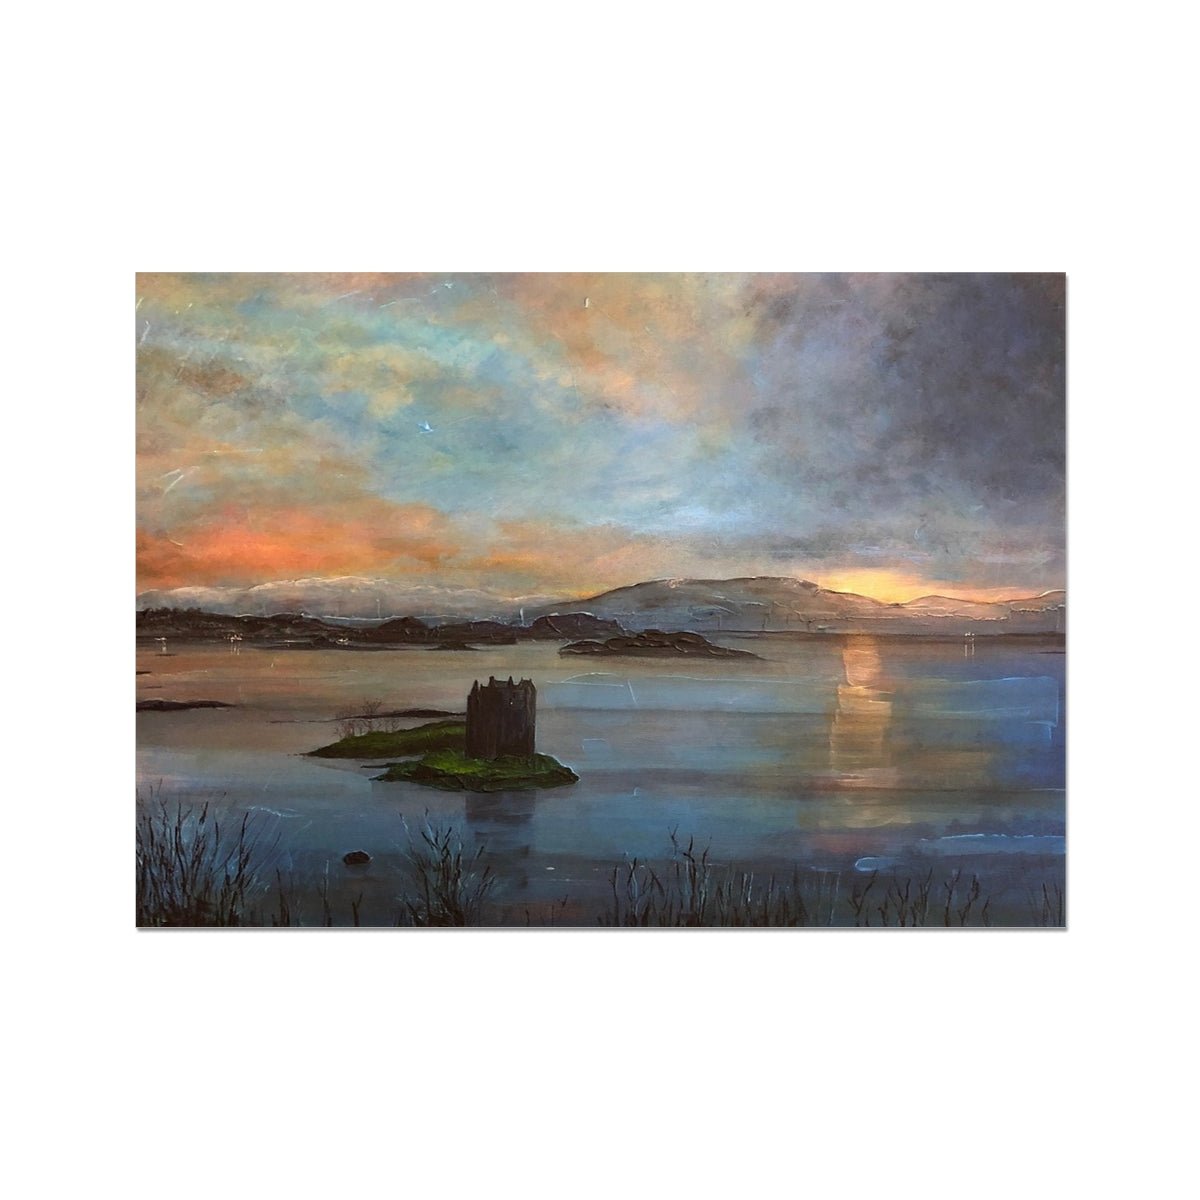 Castle Stalker Twilight Painting | Fine Art Prints From Scotland-Unframed Prints-Historic & Iconic Scotland Art Gallery-A2 Landscape-Paintings, Prints, Homeware, Art Gifts From Scotland By Scottish Artist Kevin Hunter